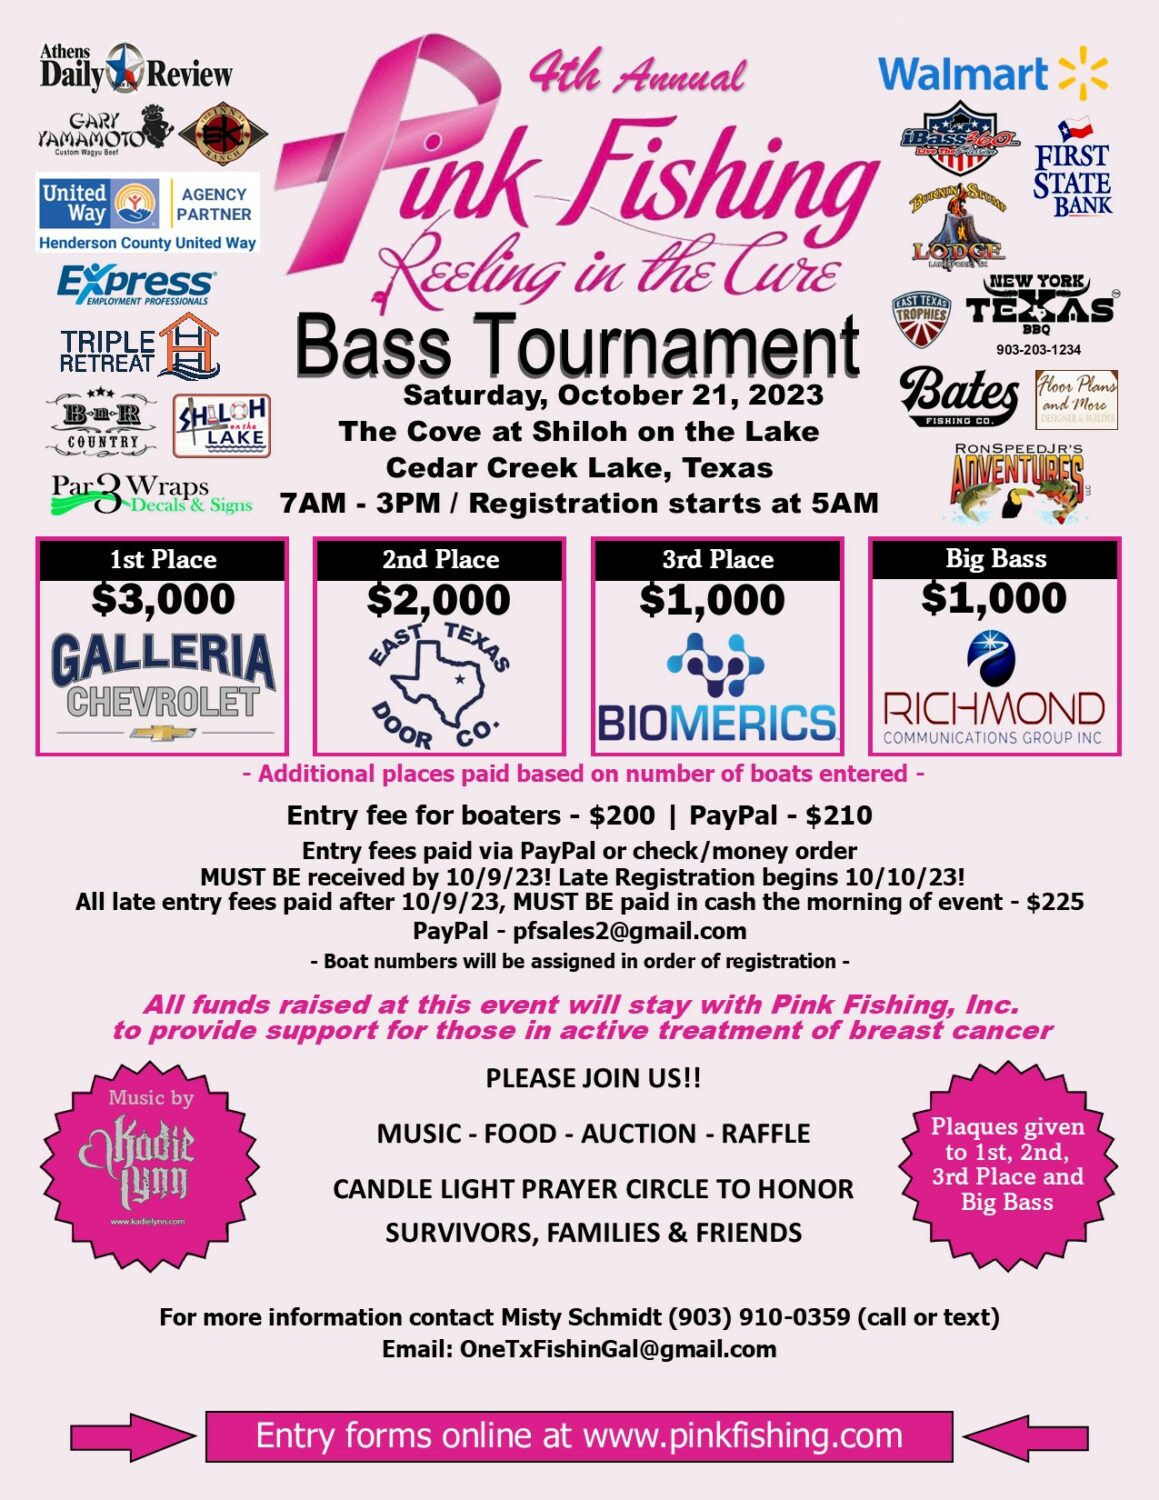 Fourth Annual Pink Fishing Bass Tournament